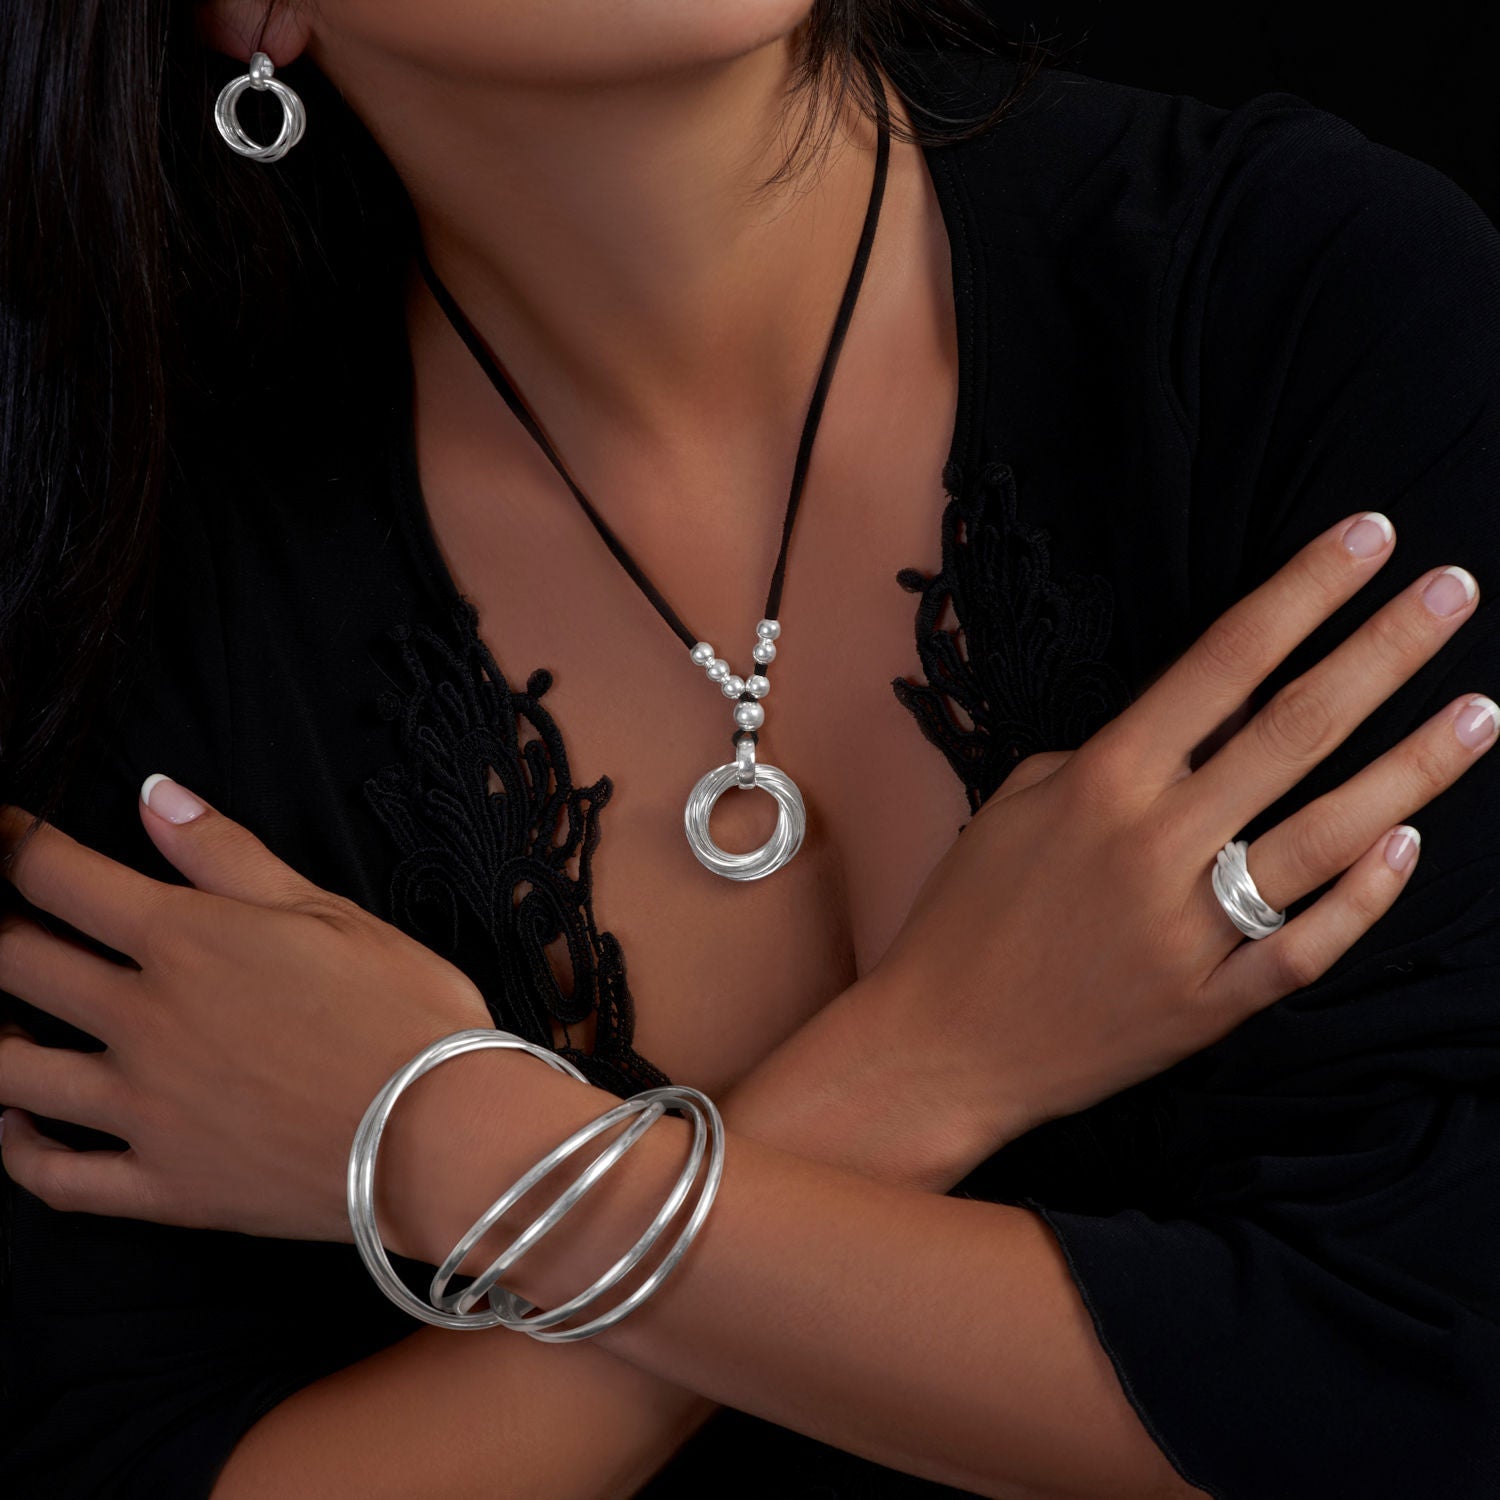 Russian Ring Necklace with 2 Rings in Sterling Silver - MYKA